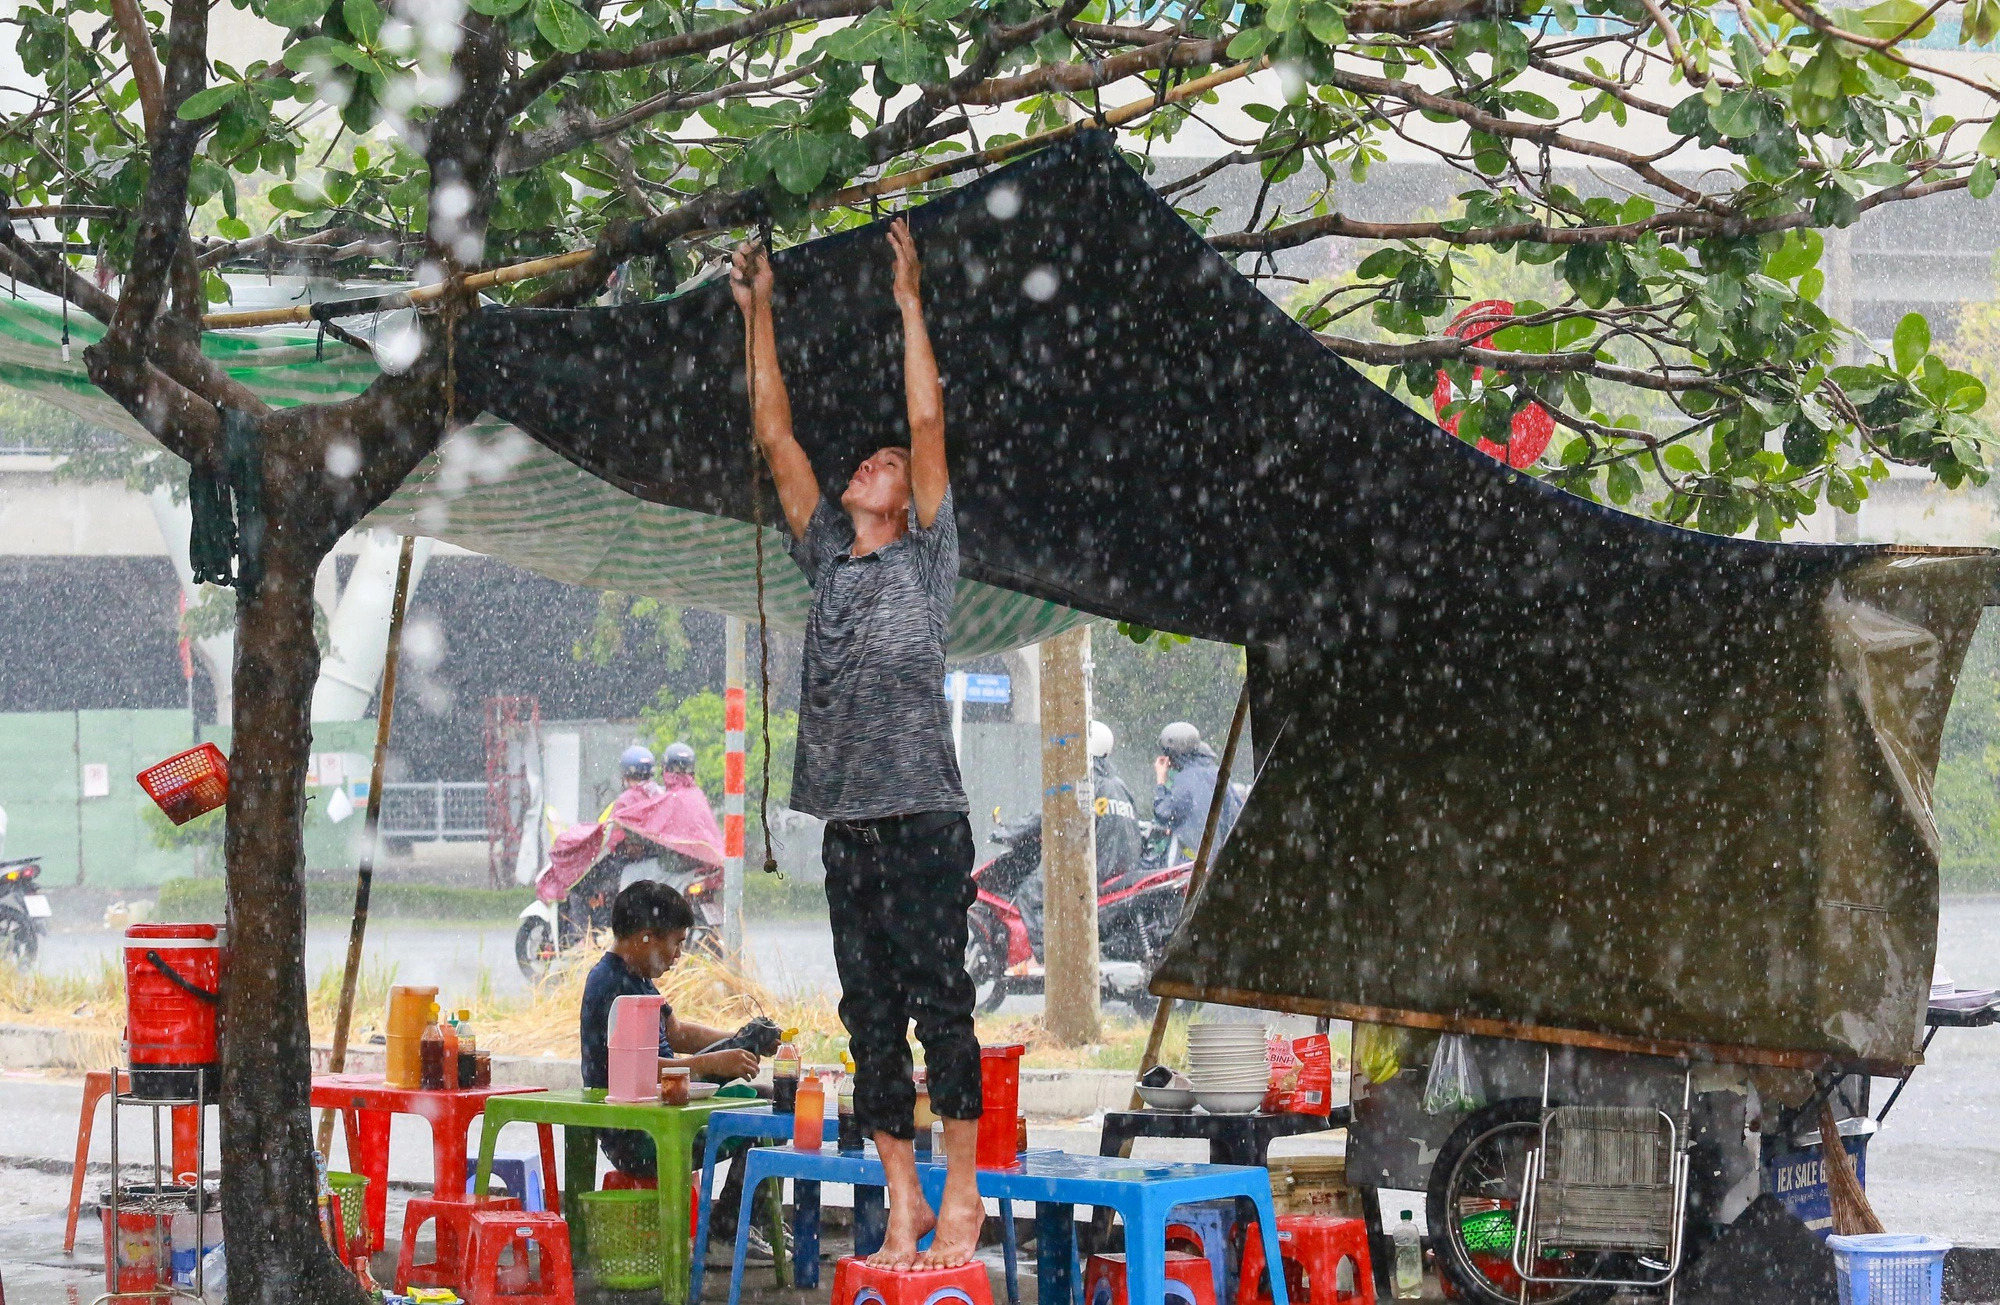 A street food vendor adjusts a plastic sheet to protect his food stall from the rain. Photo: Le Phan / Tuoi Tre